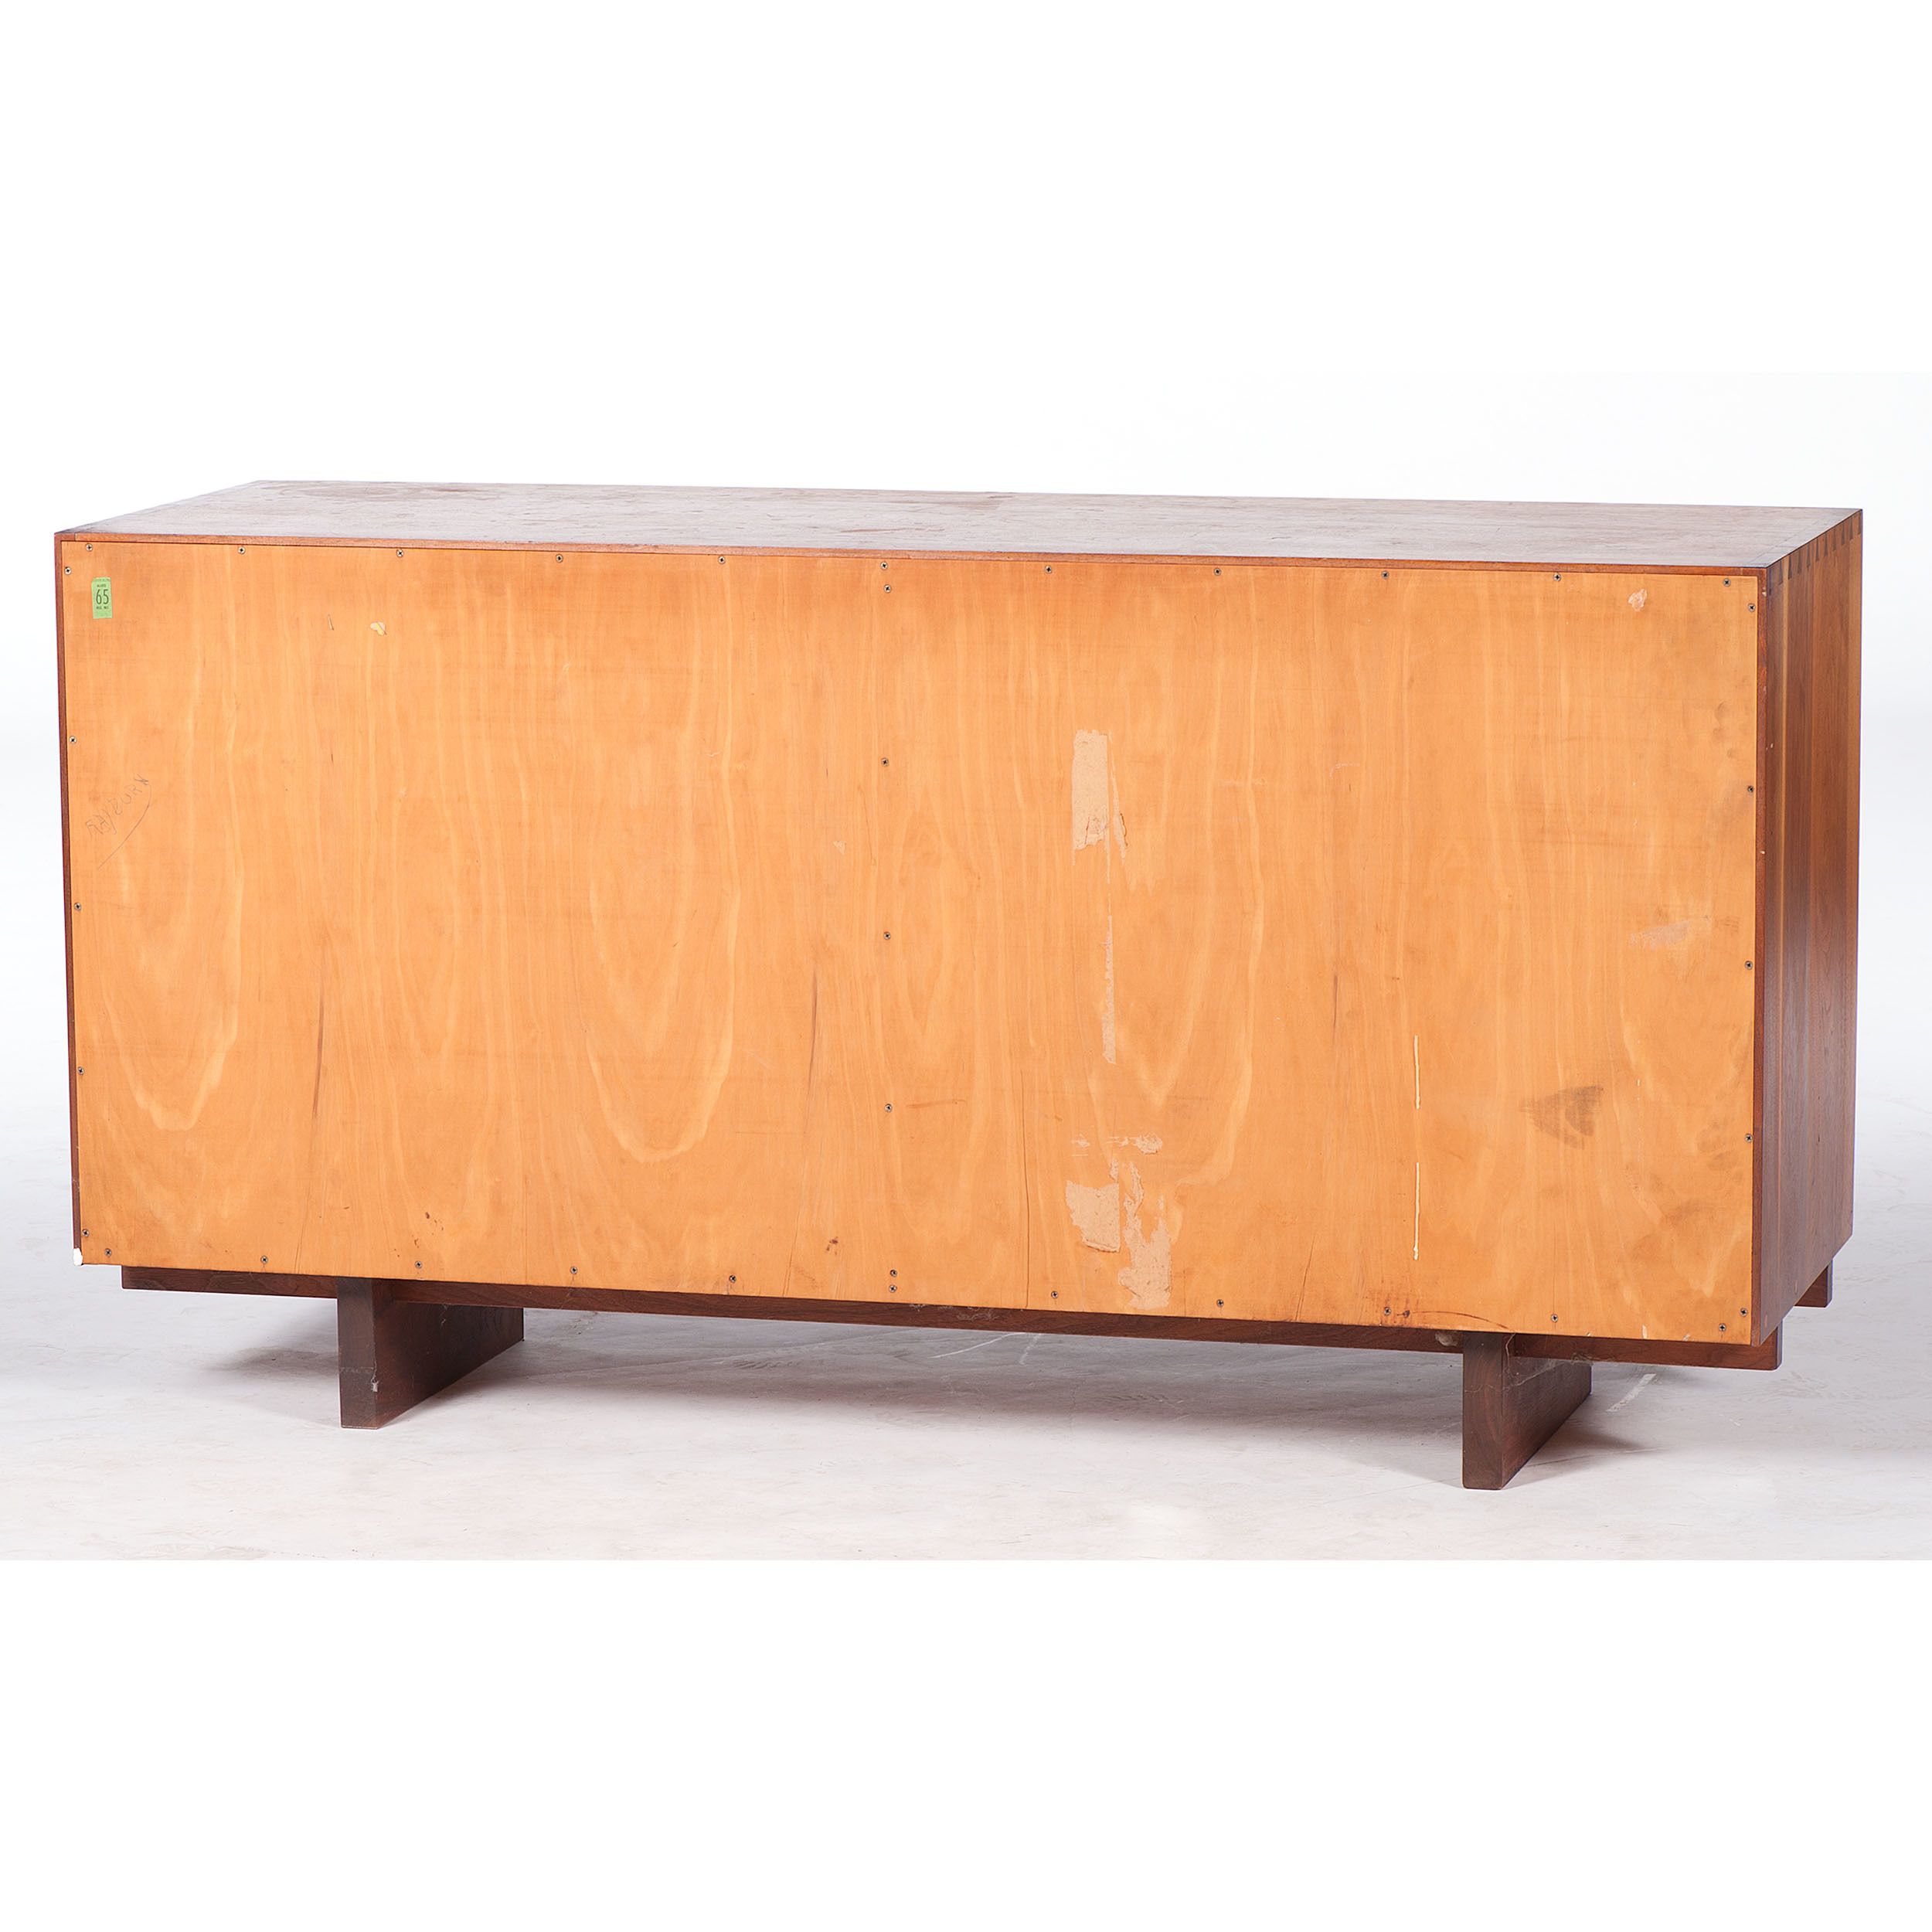 Nakashima Modernist Sideboard | Cowan's Auction House: The Midwest's Regarding Cleveland Sideboard (View 3 of 22)